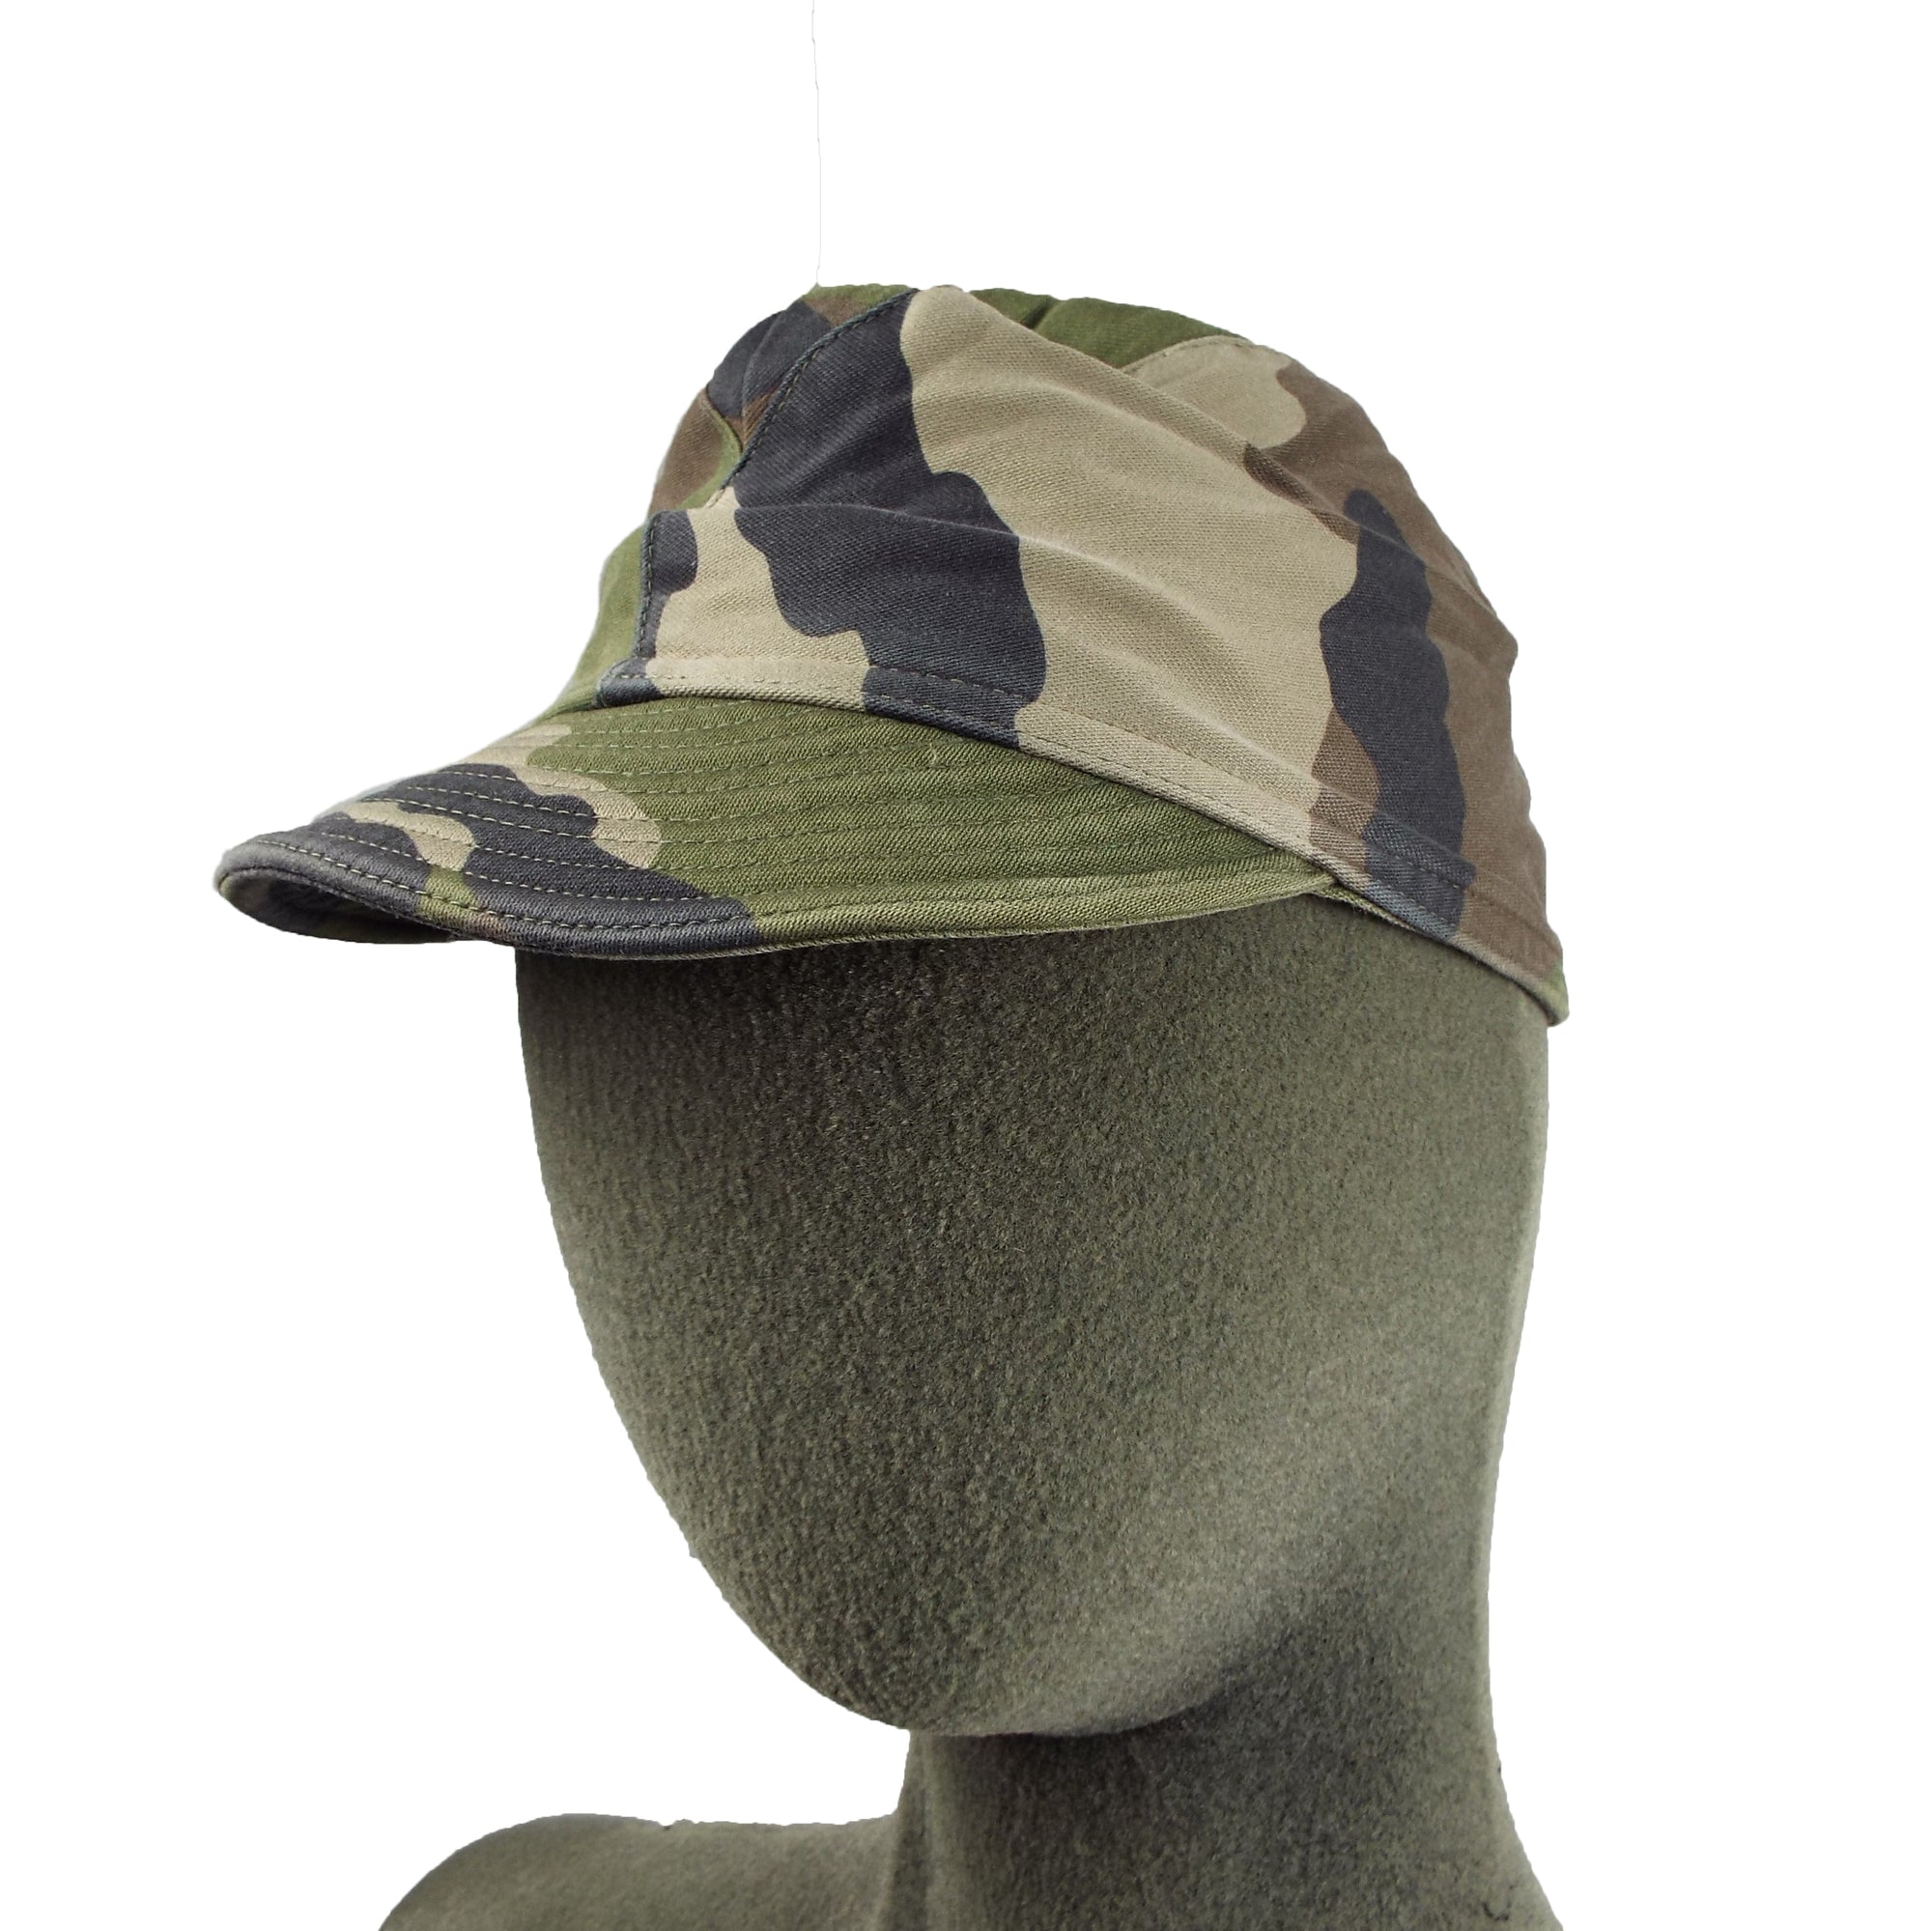 French Army - Woodland CCE Fatigue Cap - Grade 1